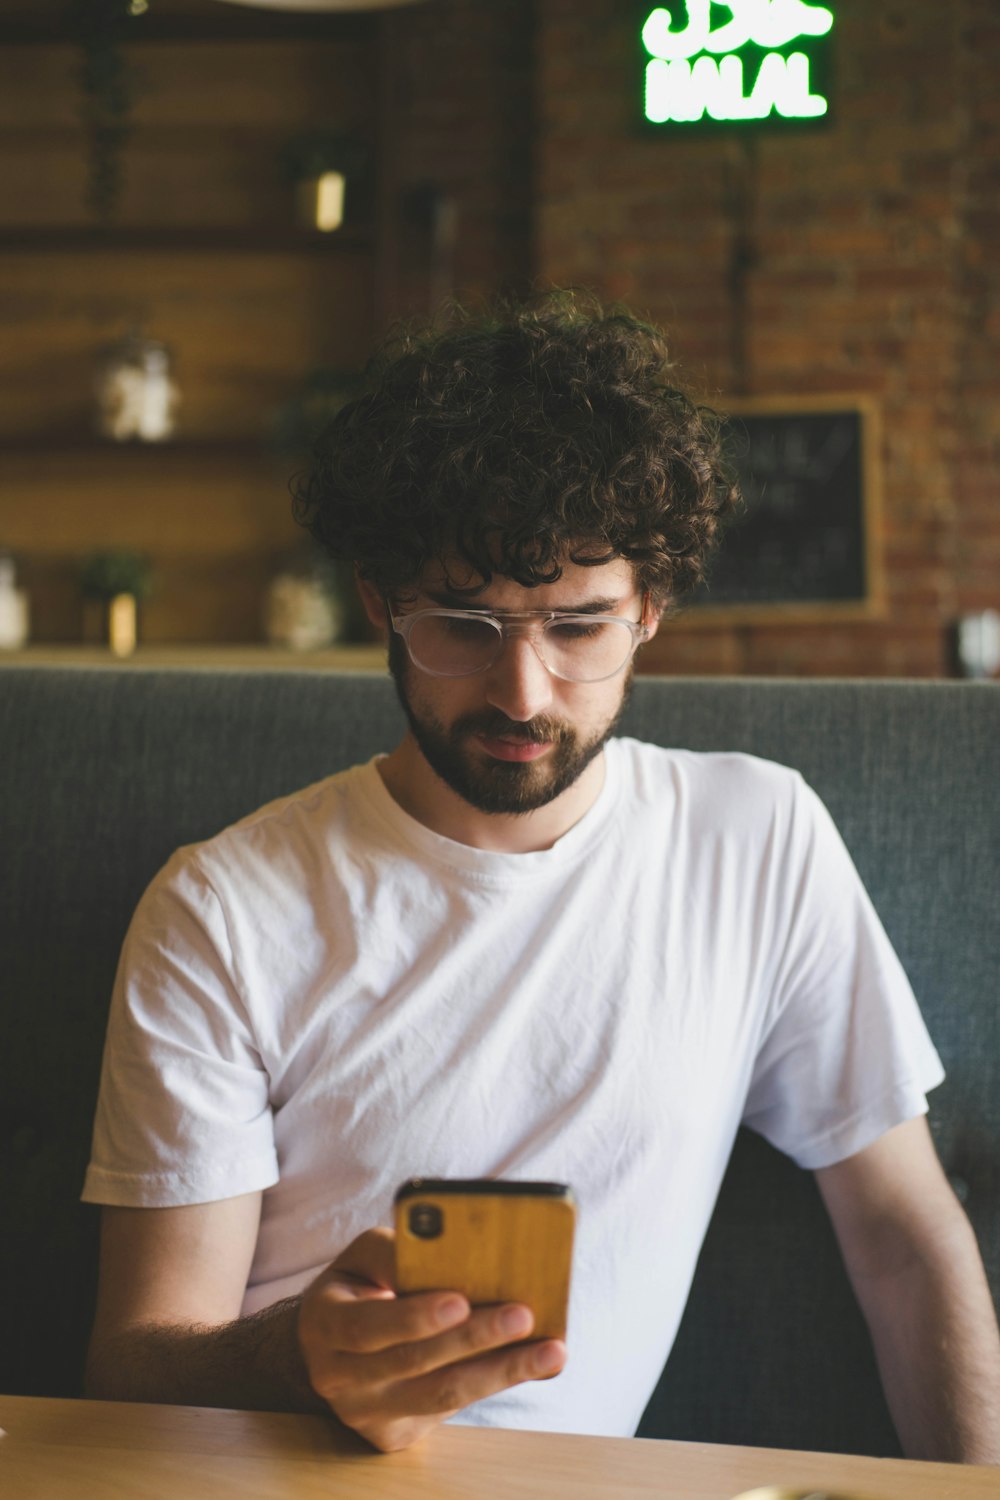 a man with curly hair holding a phone